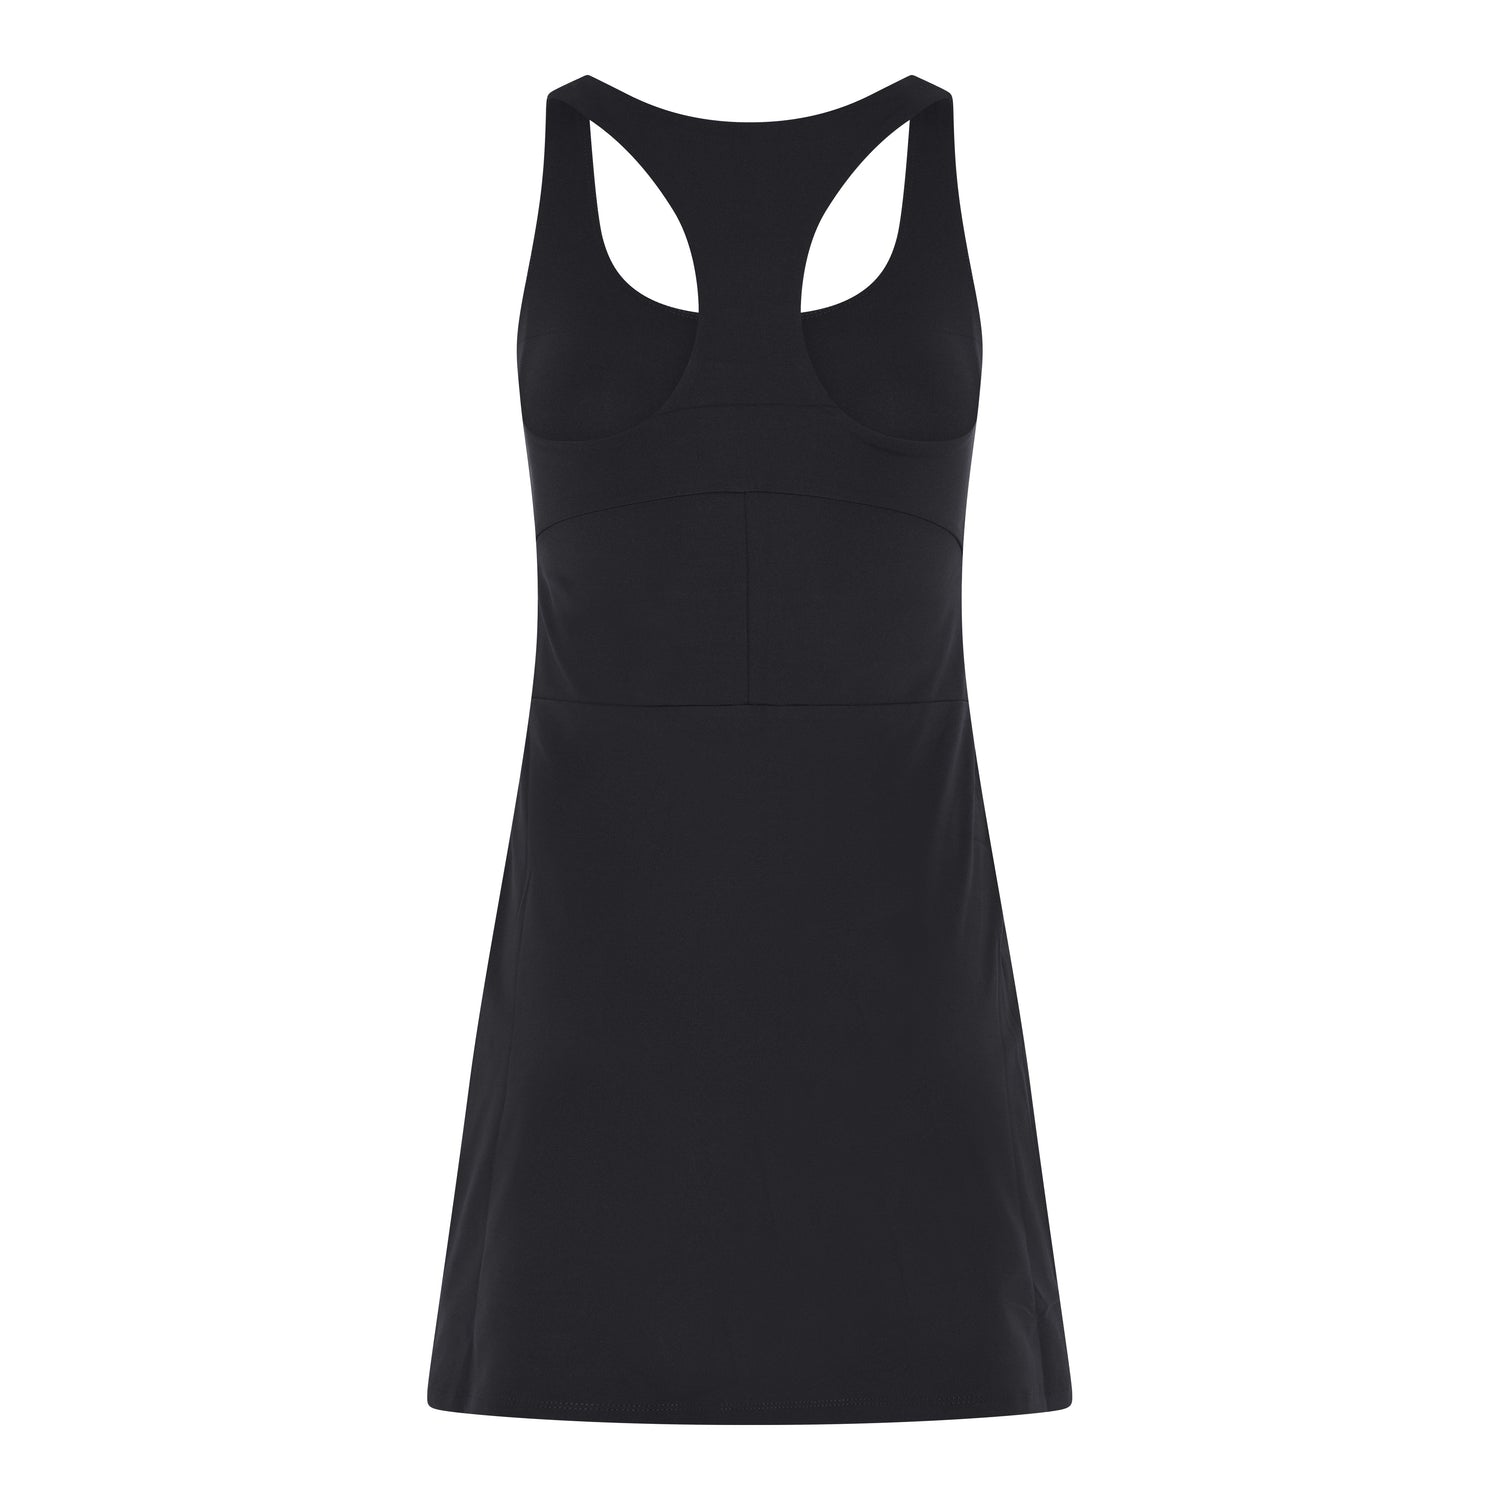 Girlfriend Collective - Paloma Dress - Made from Recycled Plastic Bottles - Weekendbee - sustainable sportswear